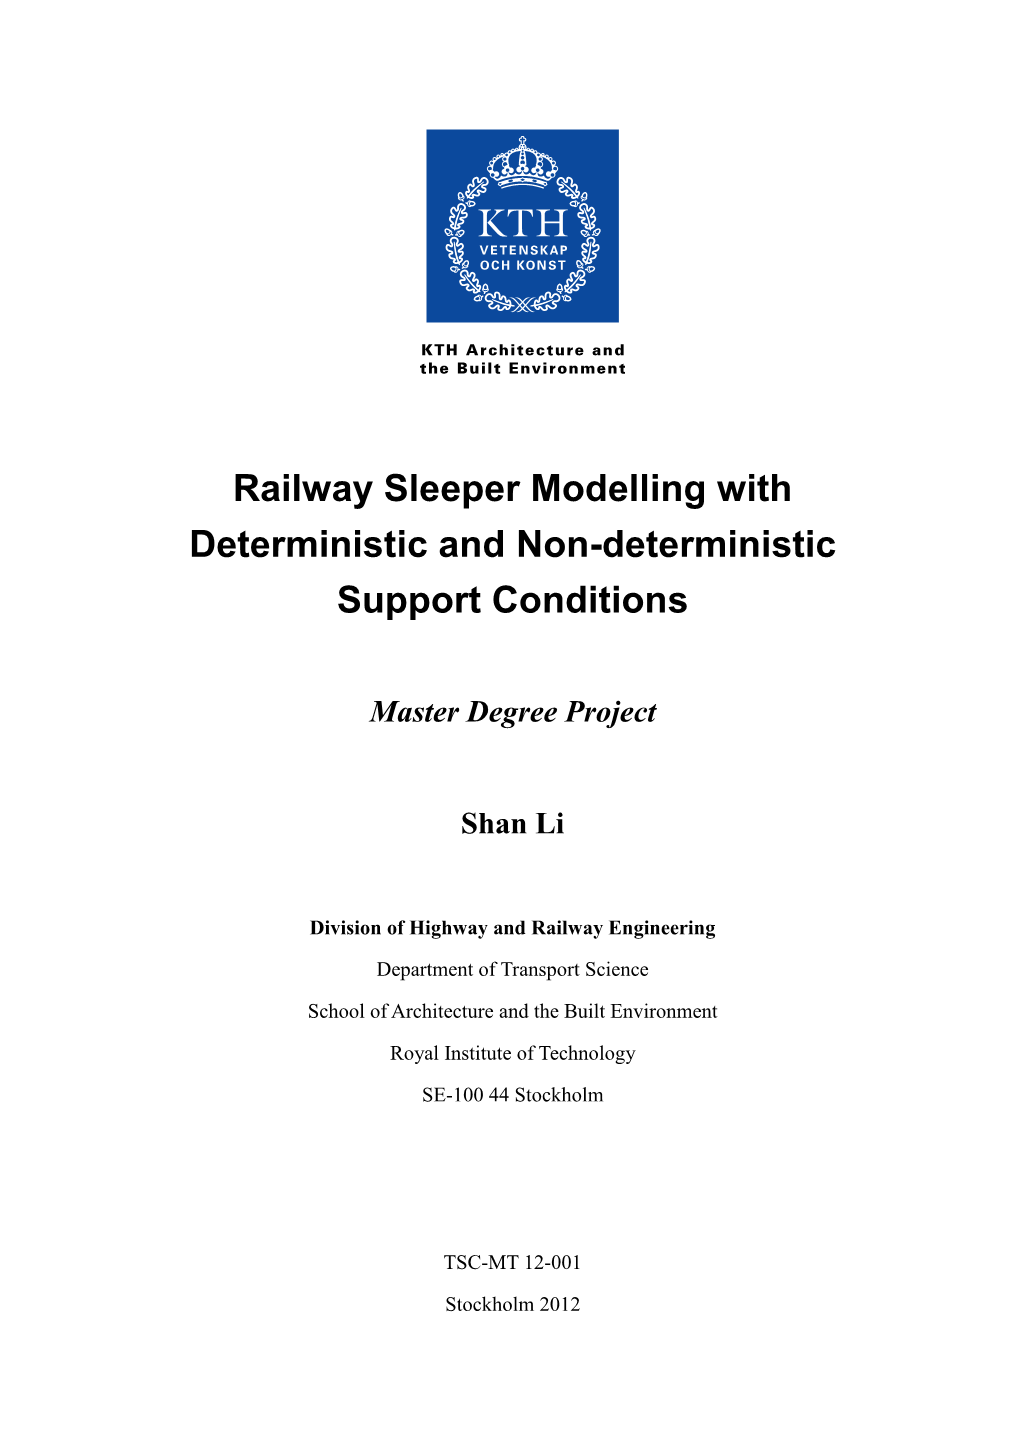 Railway Sleeper Modelling with Deterministic and Non-Deterministic Support Conditions